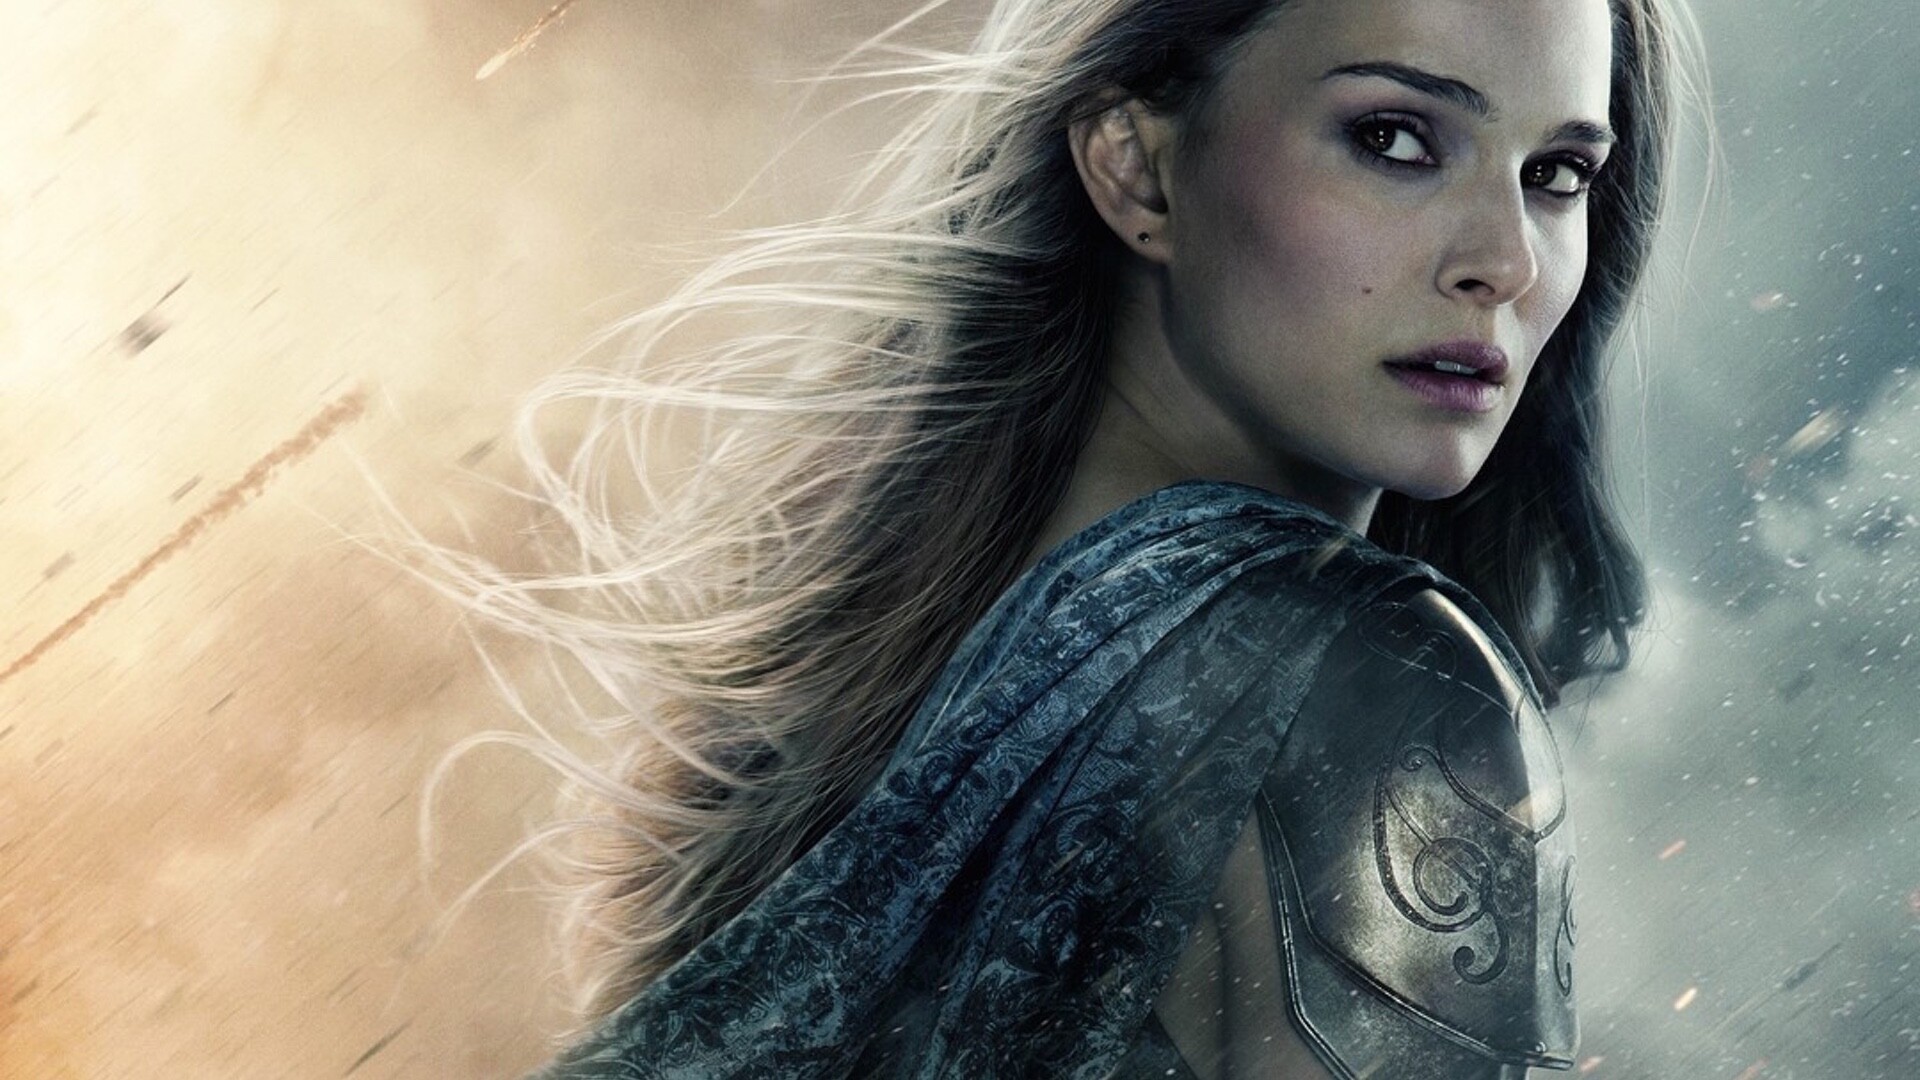 Thor: Love and Thunder: Jane Foster / Mighty Thor, Portrayed by Natalie Portman. 1920x1080 Full HD Wallpaper.